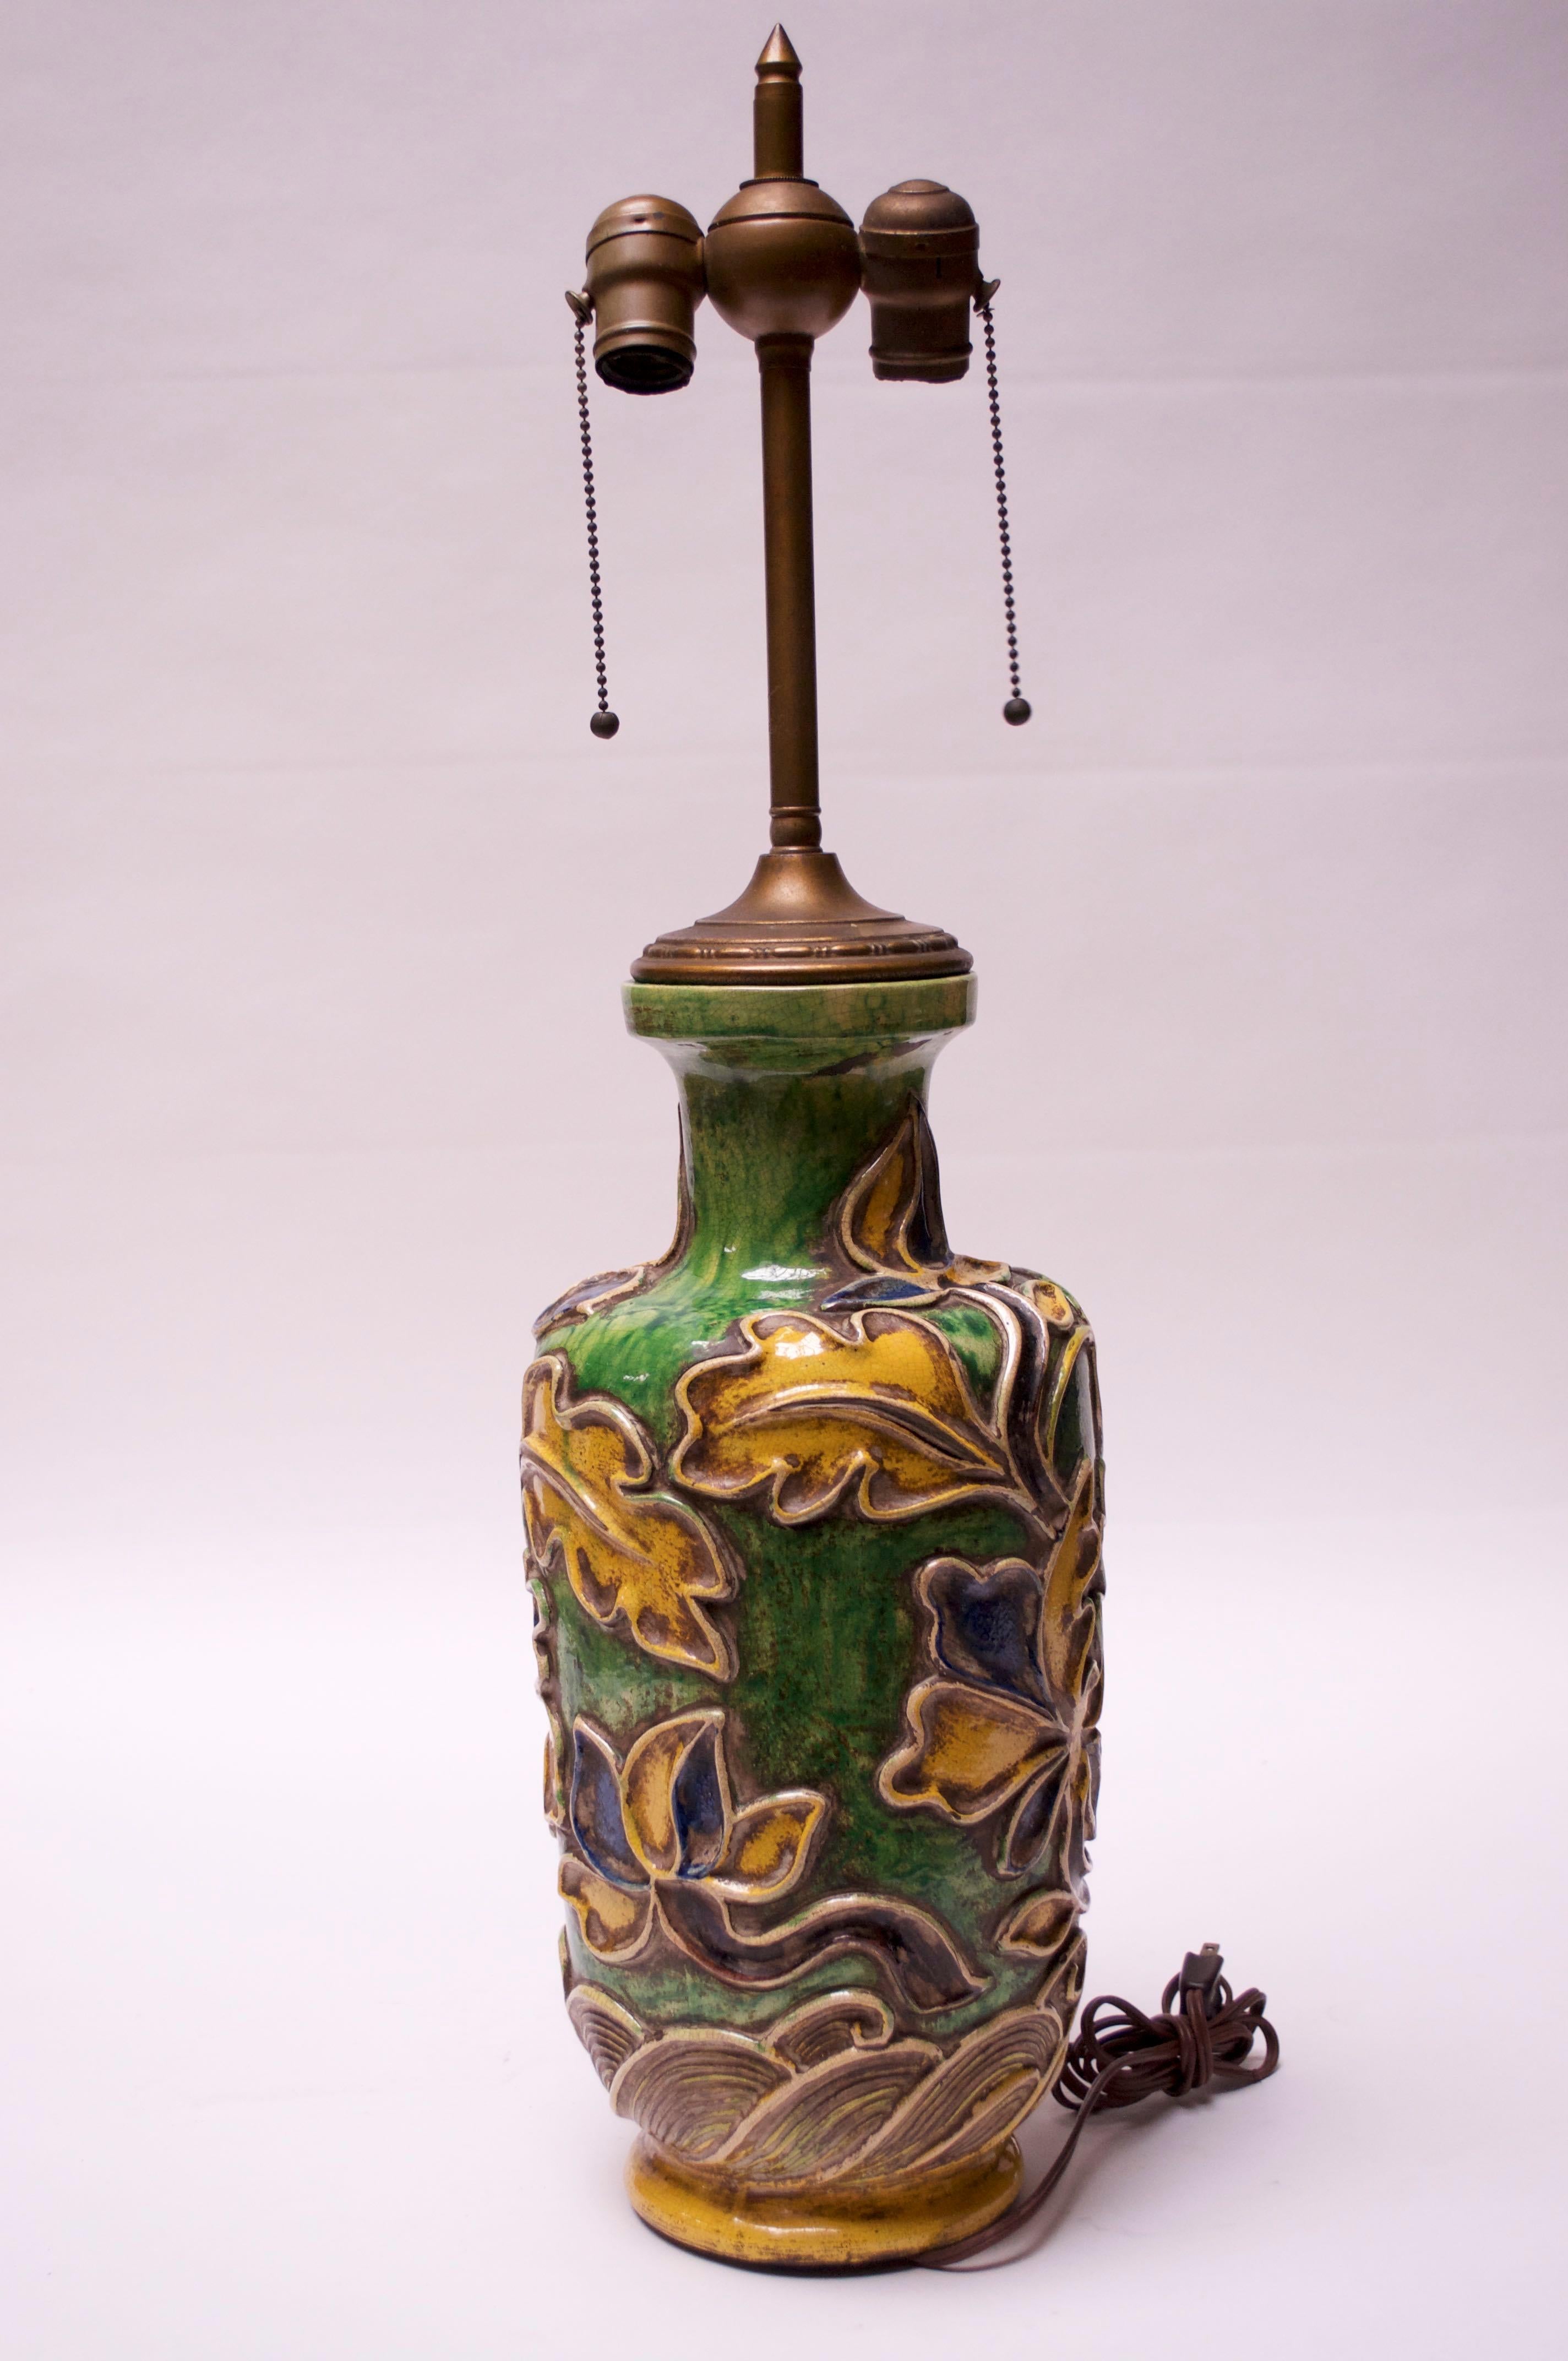 Early and rare example (1930s) from ceramicist, Ugo Zaccagnini, composed of a floral or petal motif in vibrant green, blue, and yellow with brass double socket, stem and finial. Nice, original condition with only minor wear consistent with age and